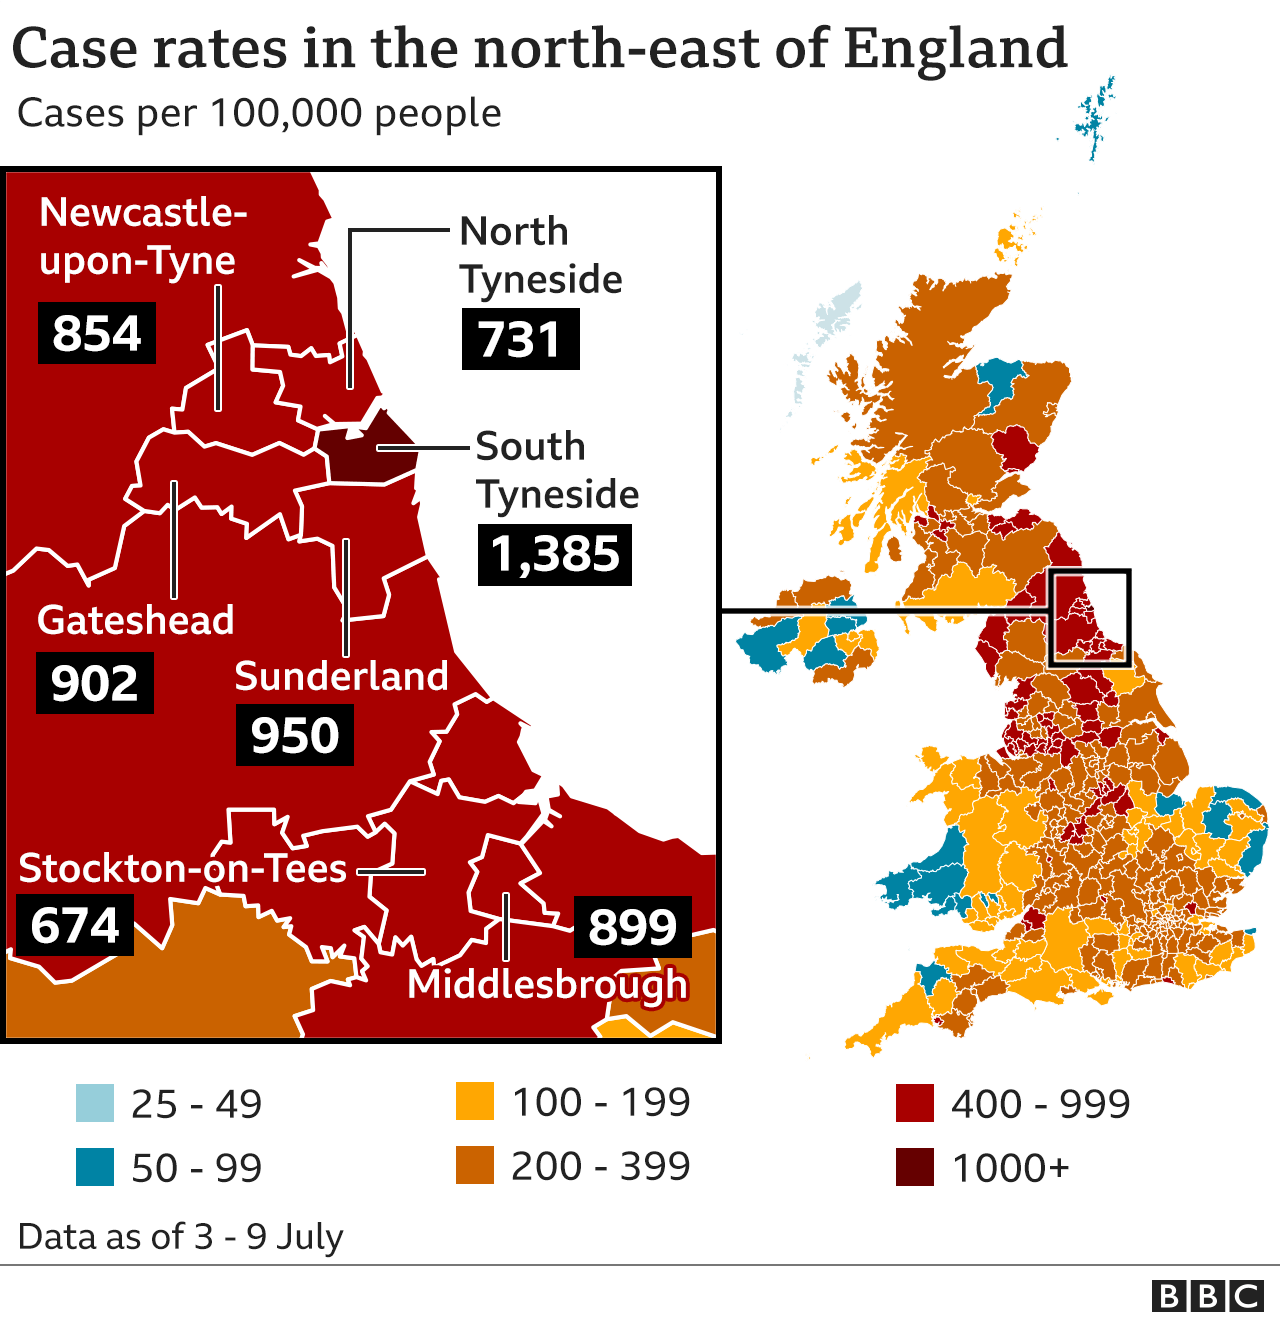 map showing case rates in the north-east